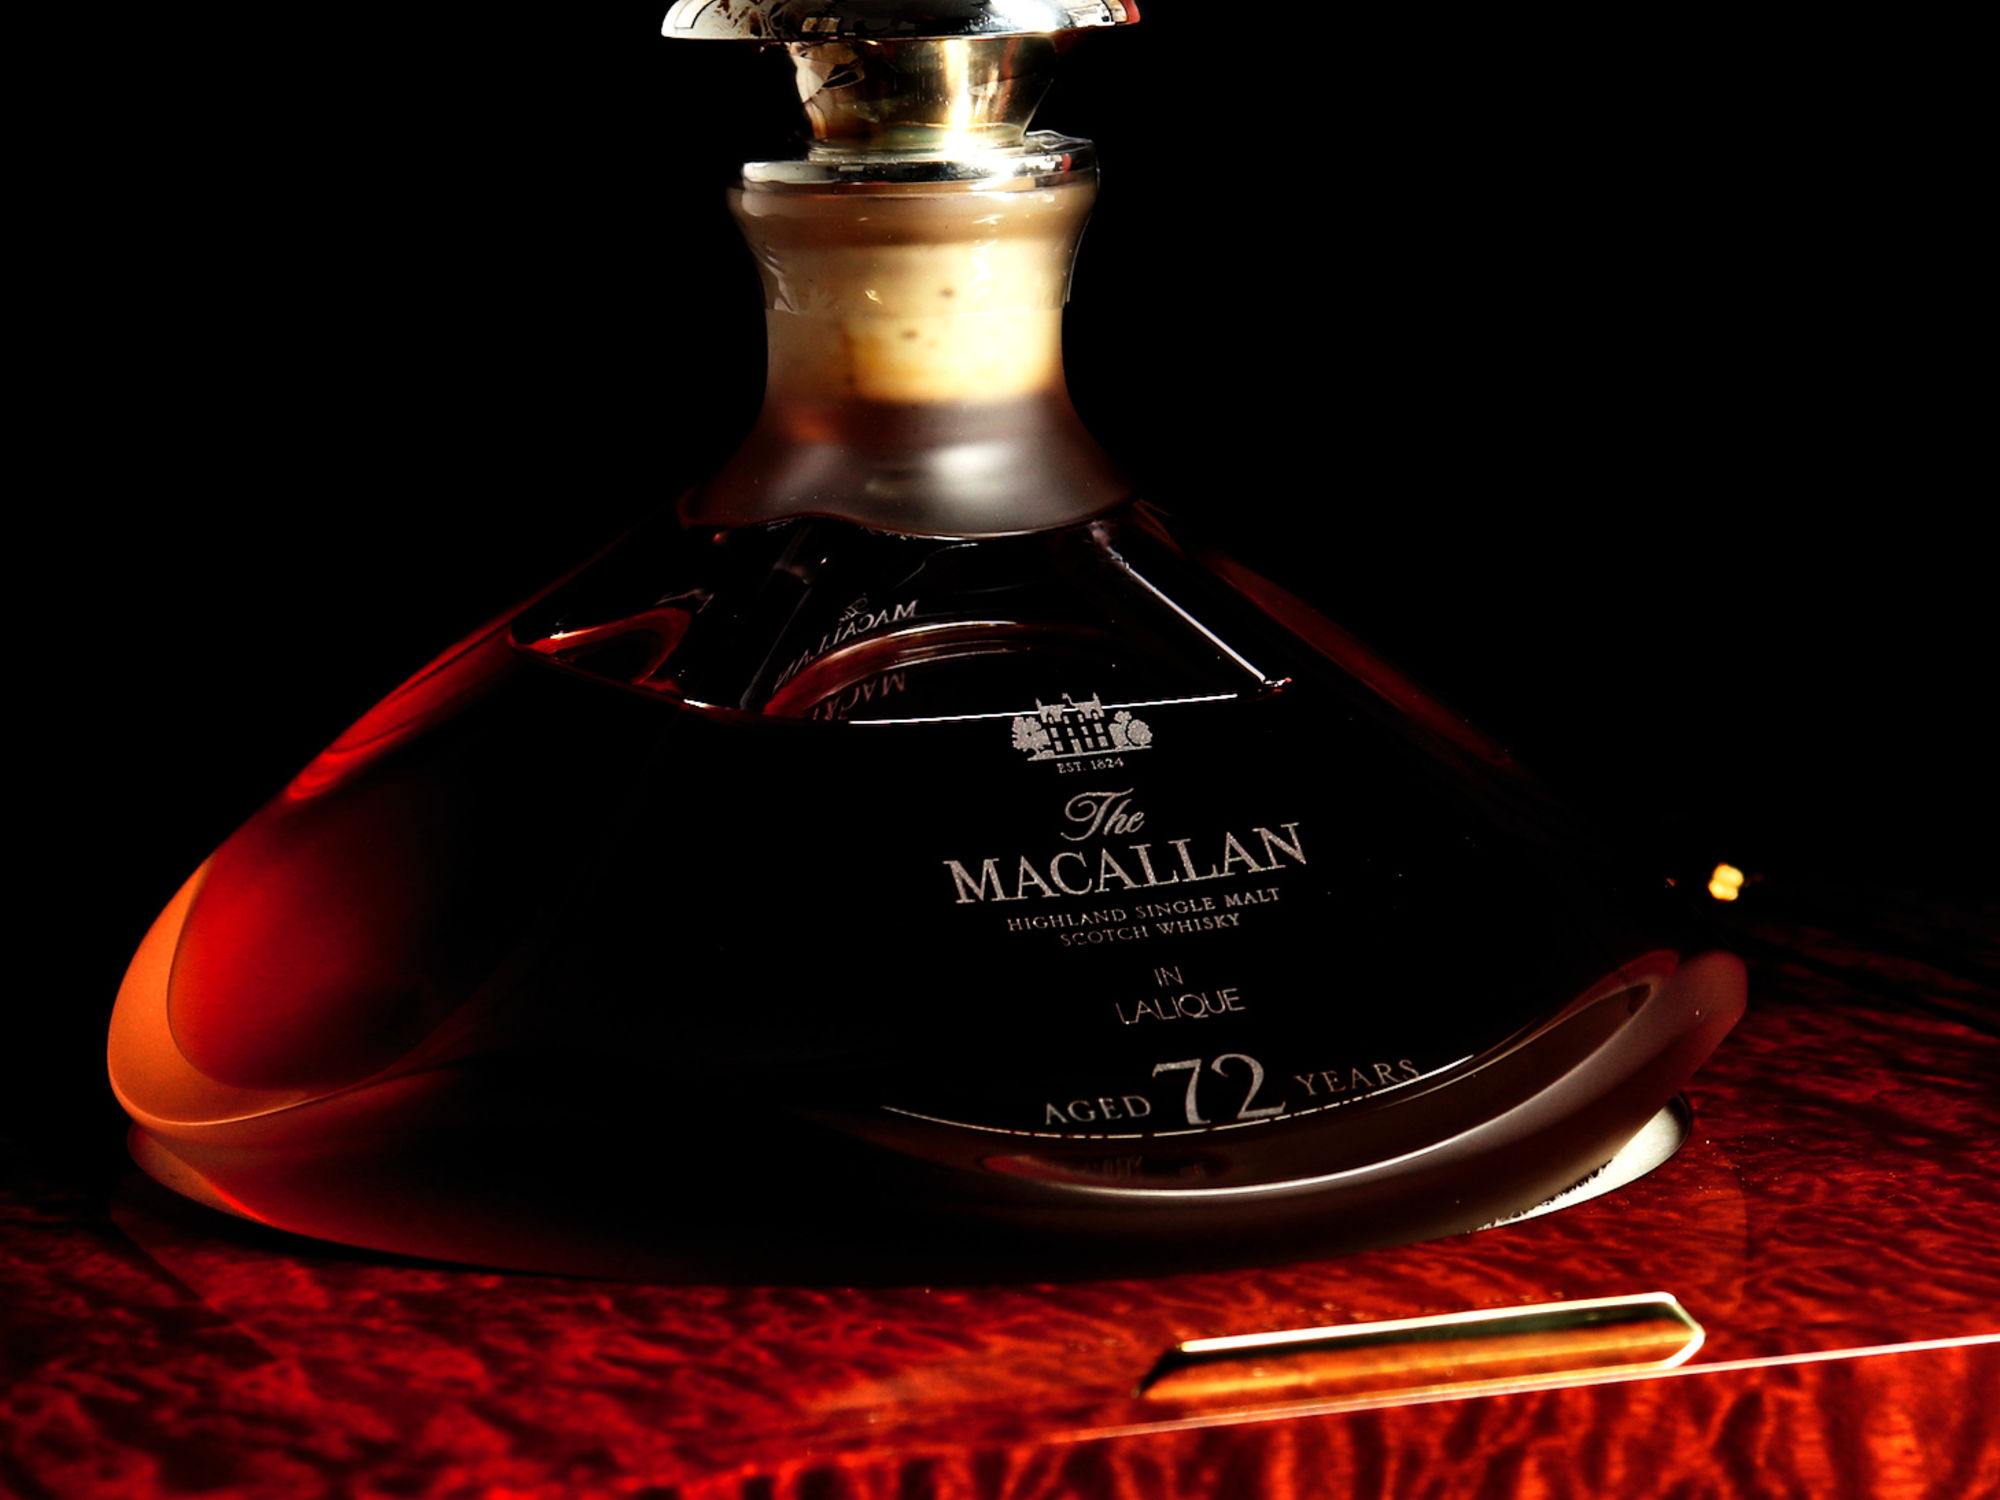 The Macallan 72 year Old In Lalique